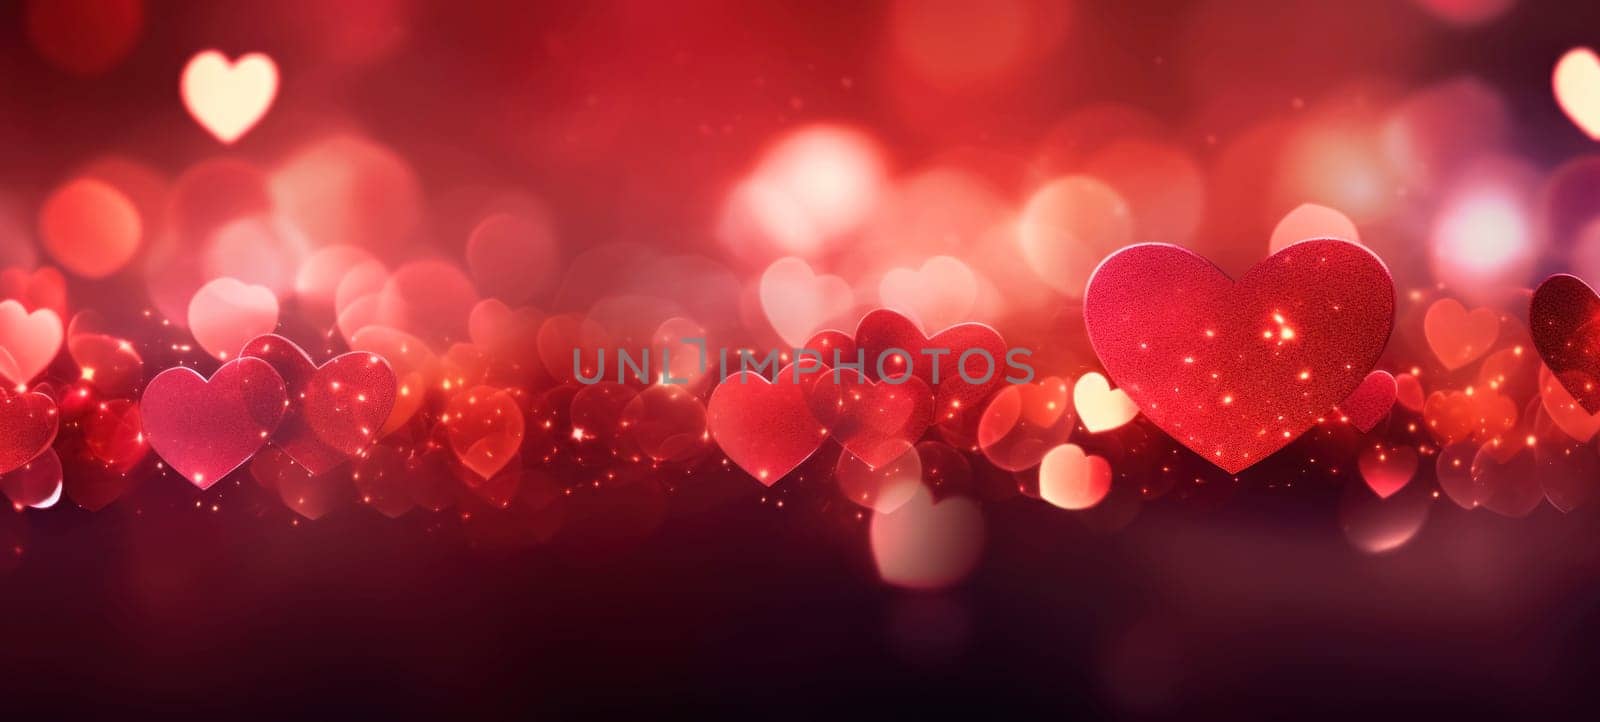 Red background with hearts for Valentine's Day. Abstract horizontal banner or greeting card.